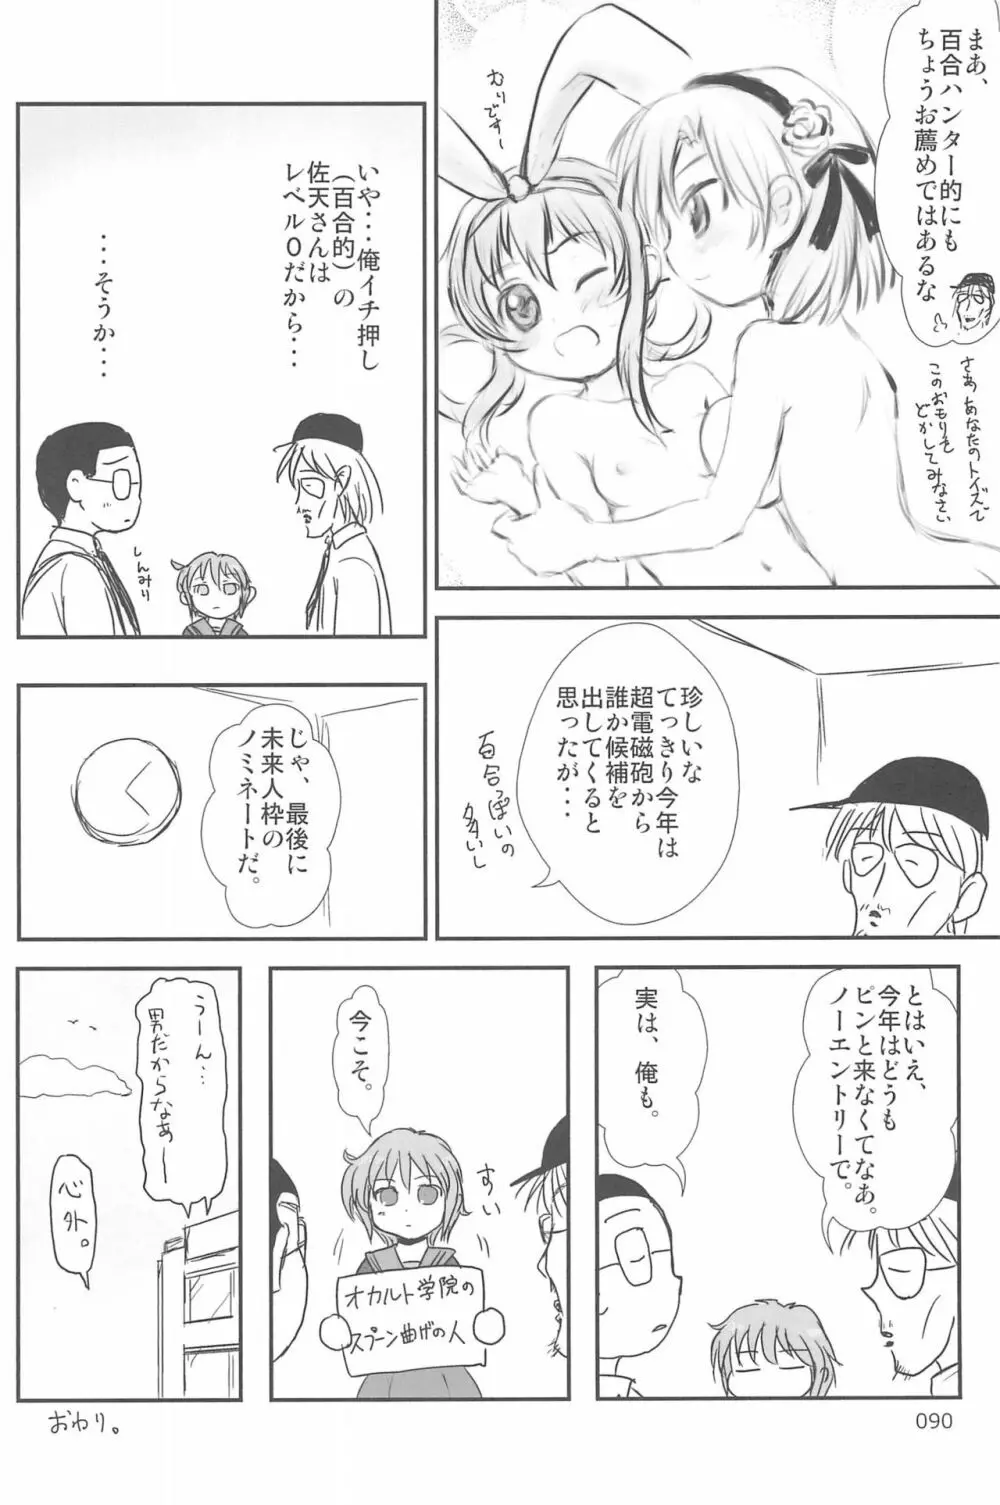 ND-special Volume 6 90ページ